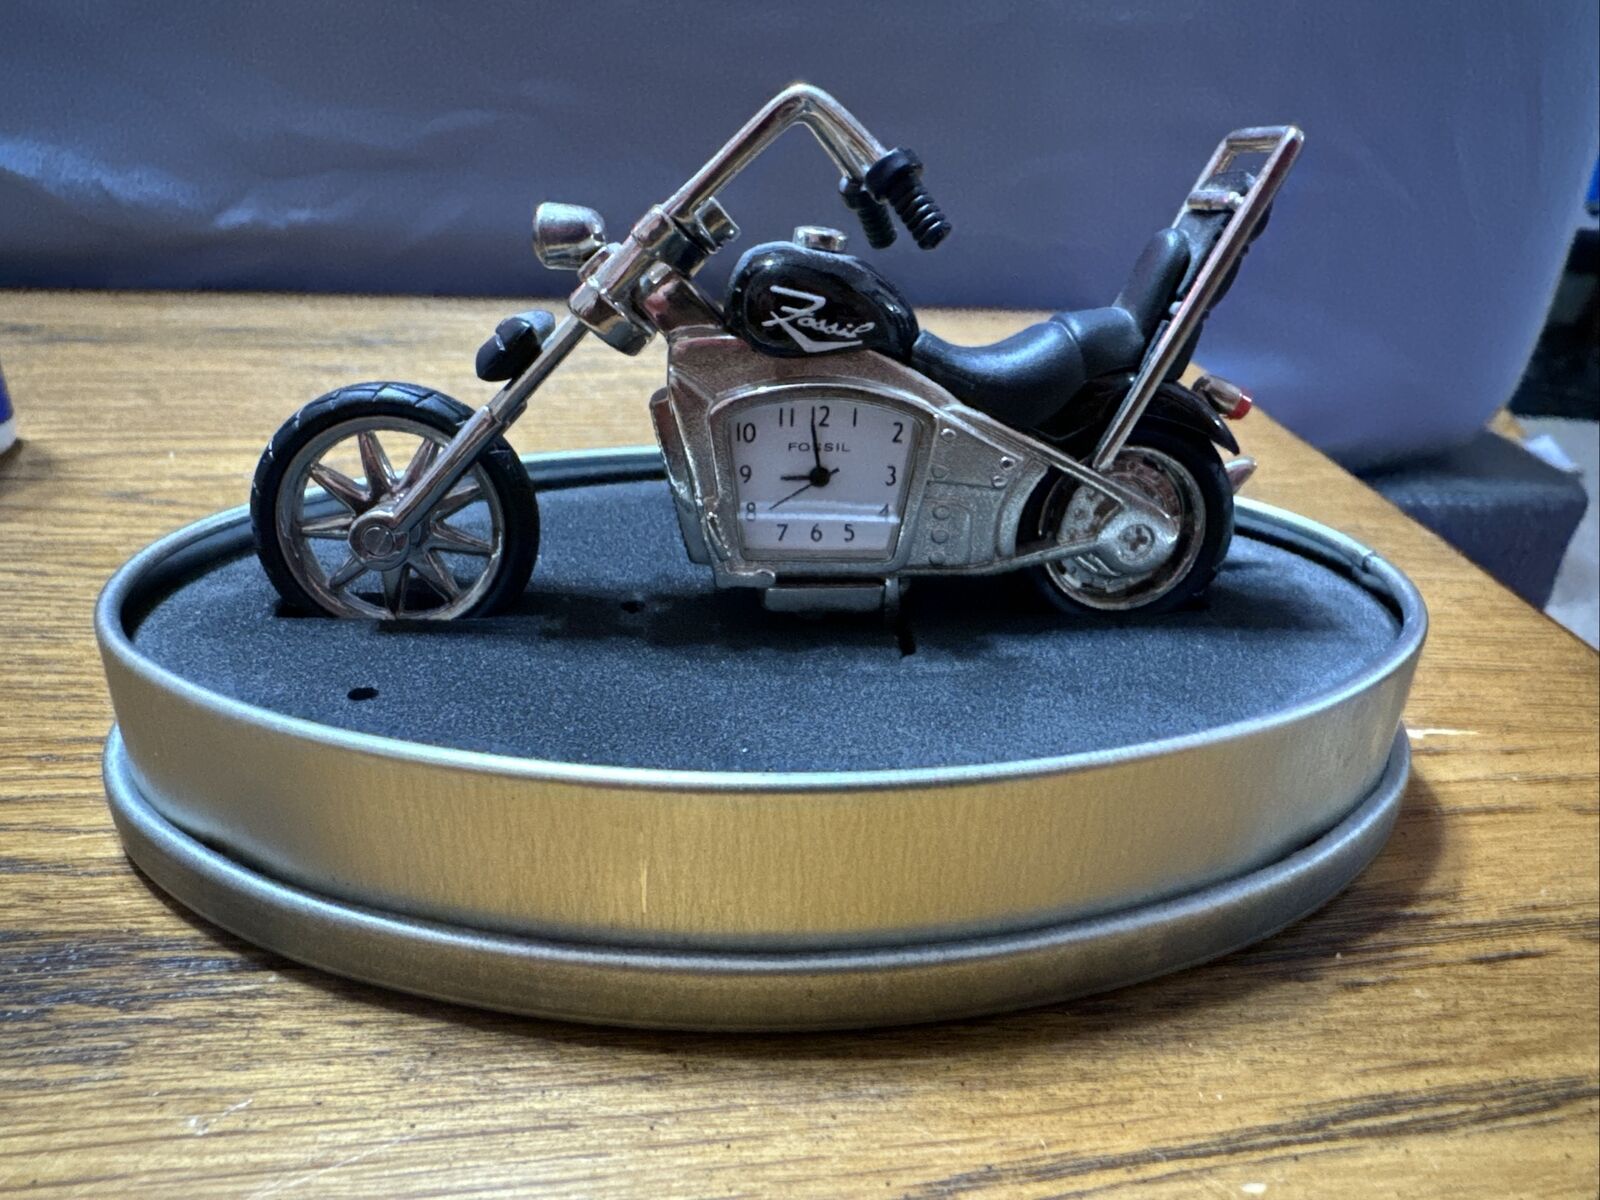 VINTAGE FOSSIL COLLECTOR'S TIMEPIECE MOTORCYCLE DESK CLOCK NOVELTY DECOR WORKS